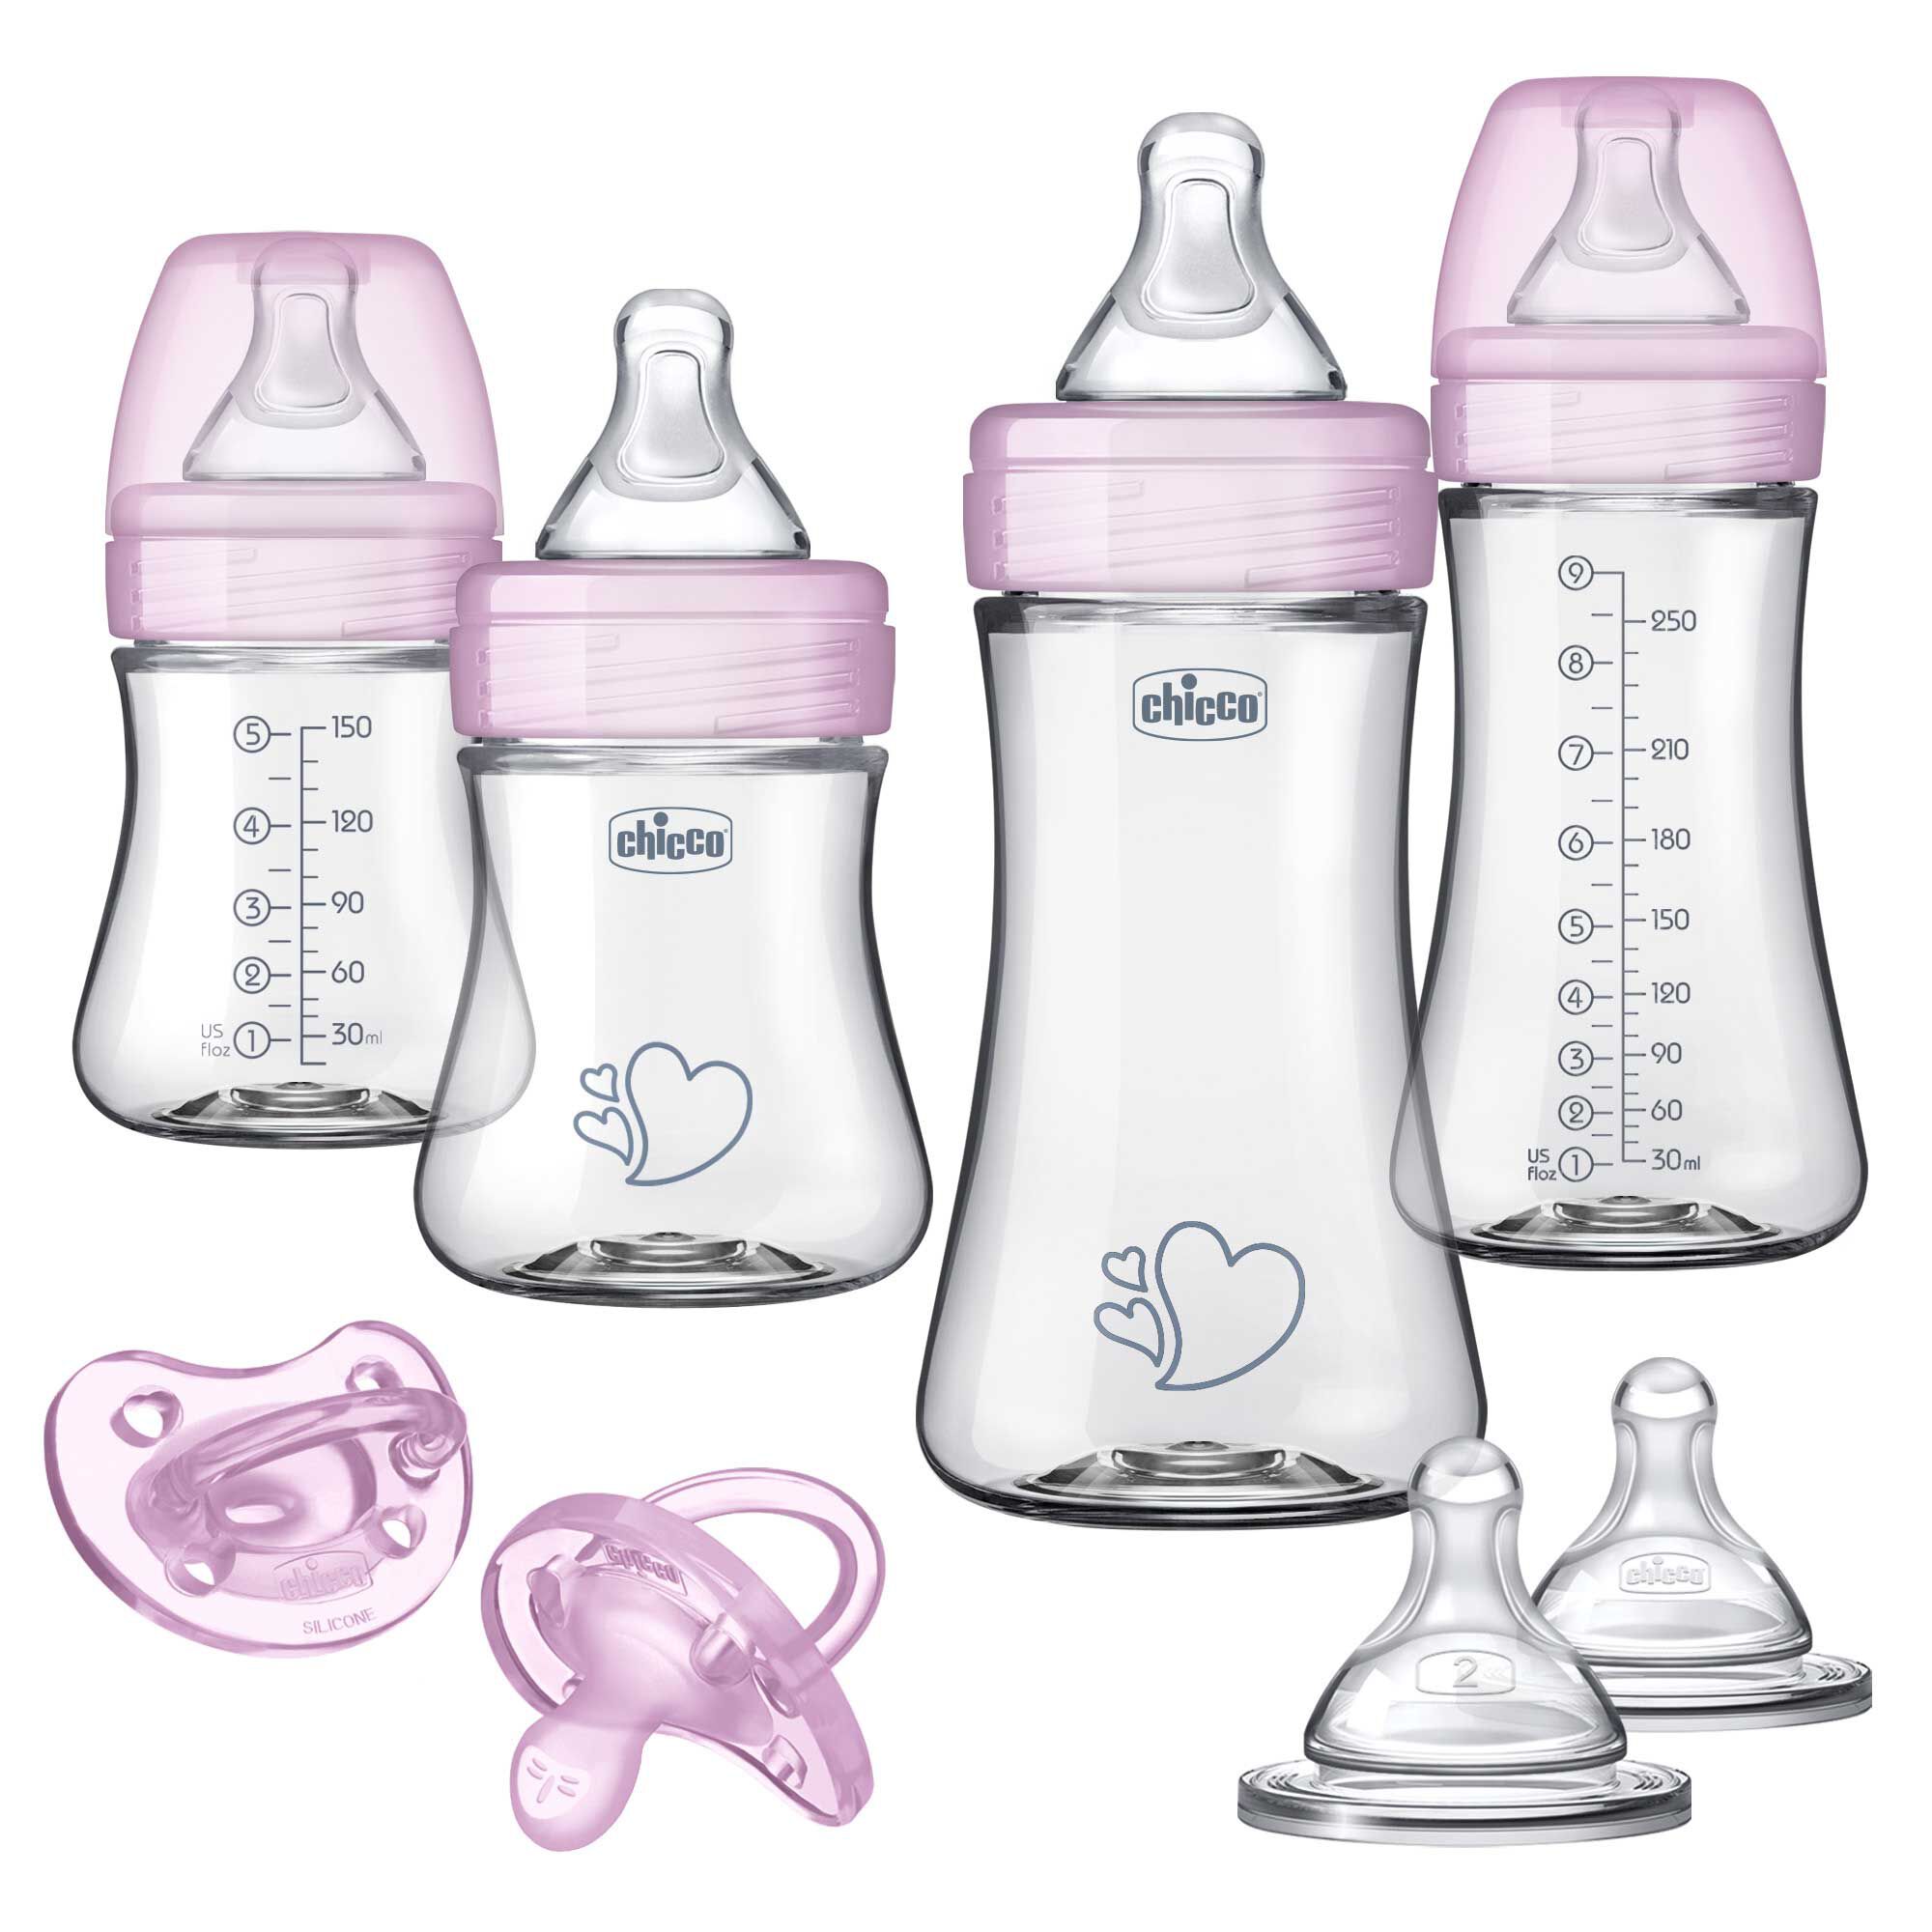 https://www.chiccousa.com/dw/image/v2/AAMT_PRD/on/demandware.static/-/Sites-chicco_catalog/default/dw68573701/images/products/feeding/duo-bottle/chicco-duo-bottle-newborn-gift-set-pink.jpg?sw=2000&sh=2000&sm=fit